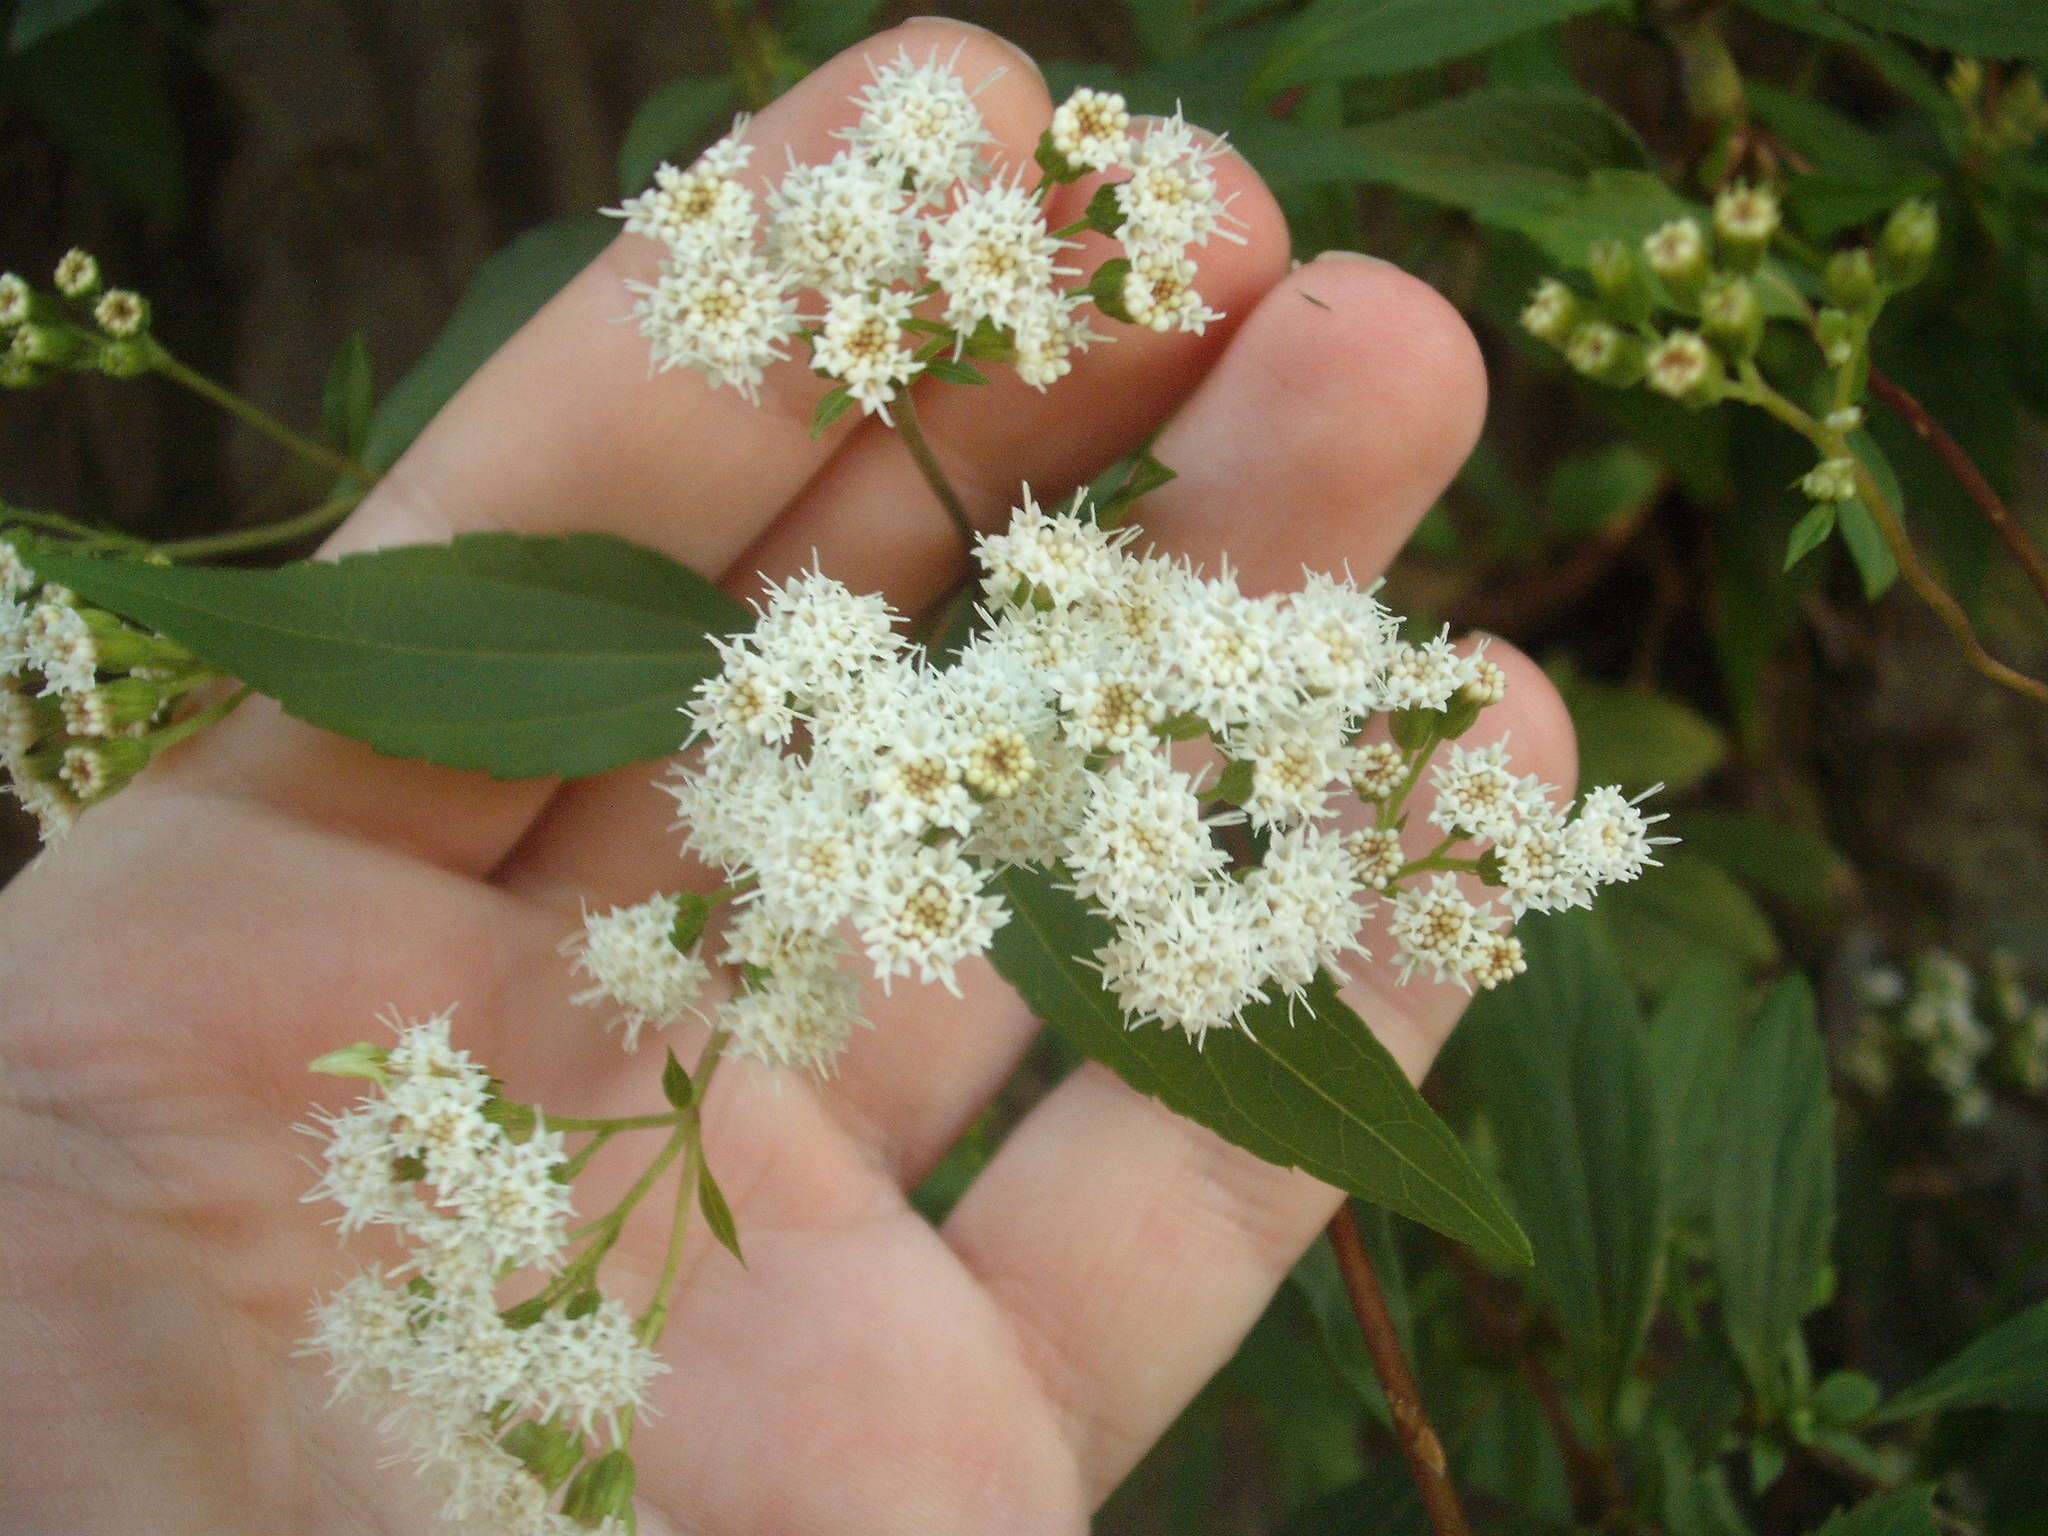 Image of spreading snakeroot